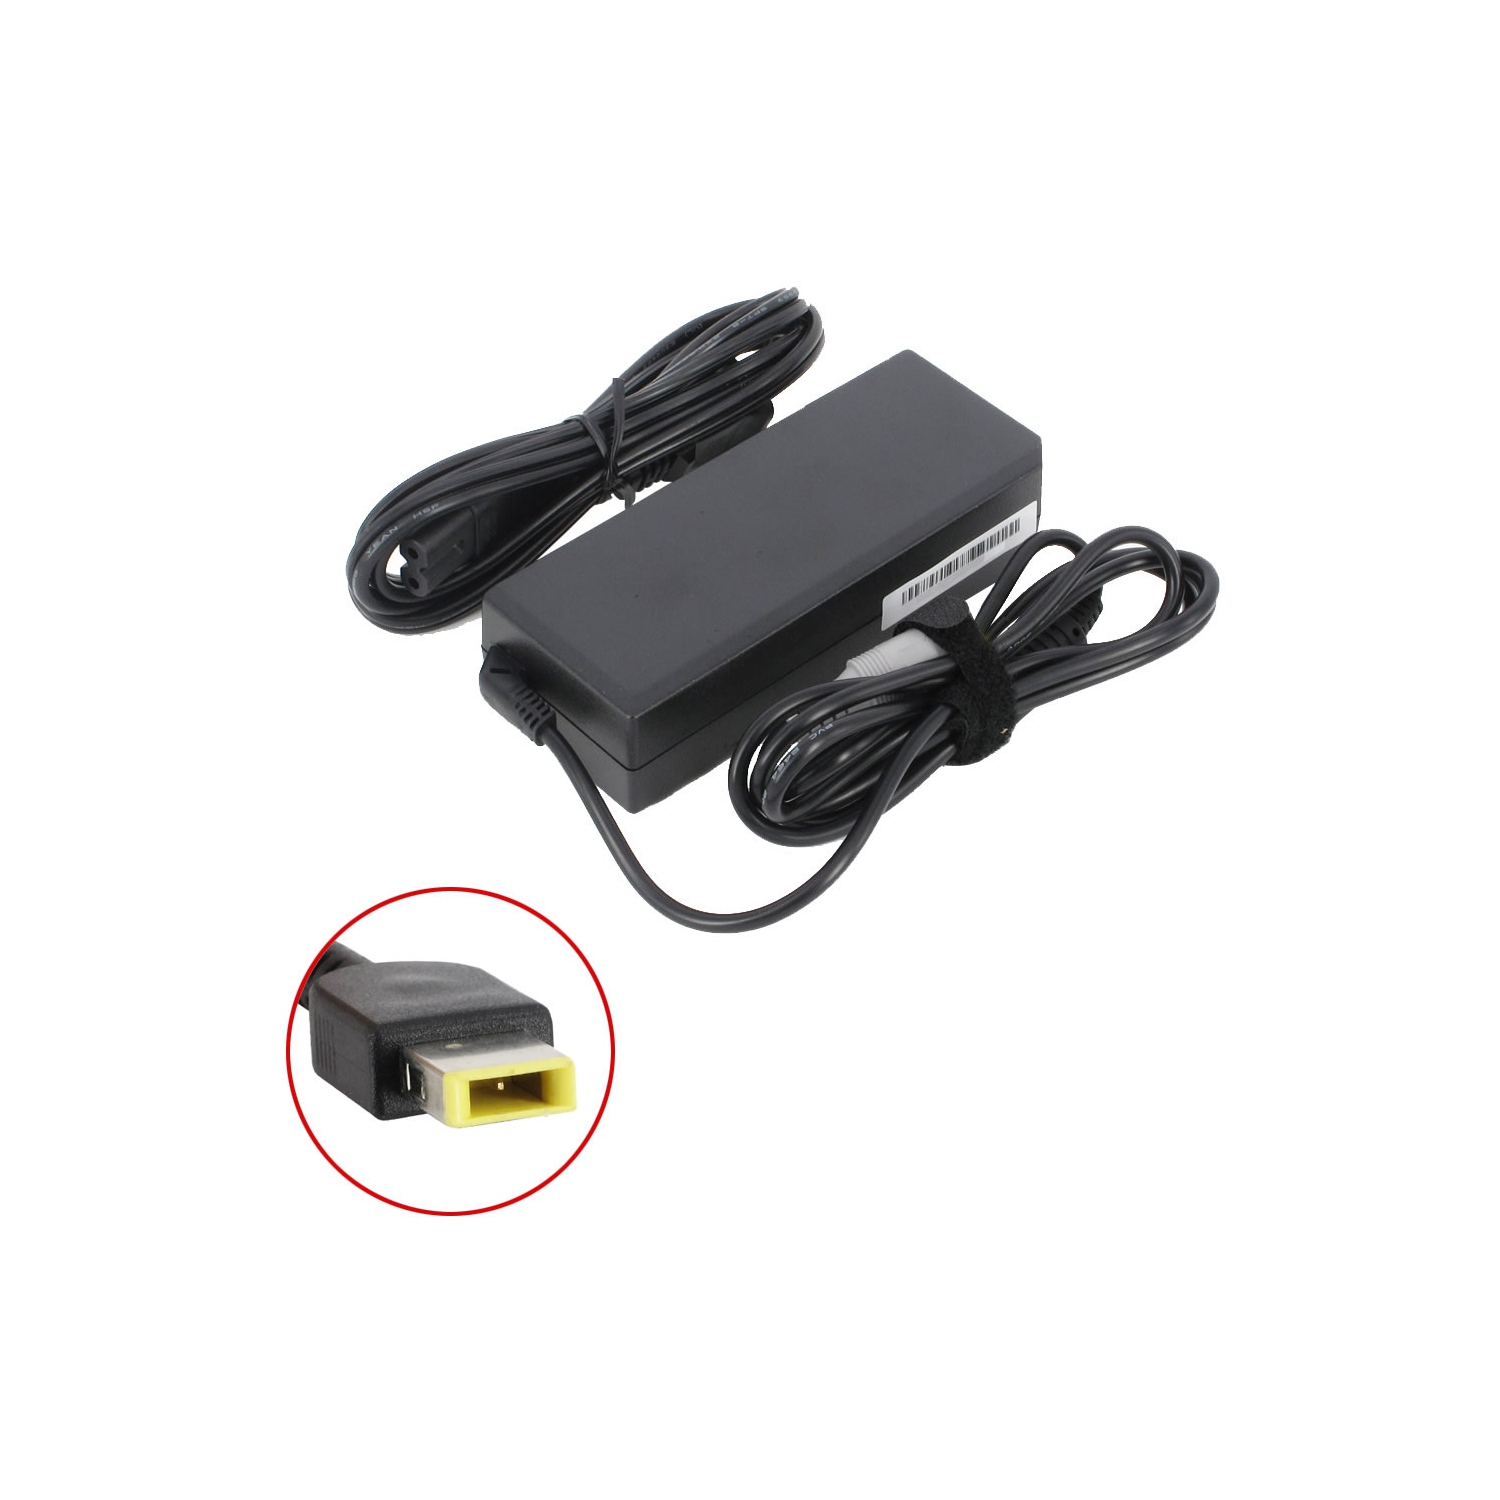 BATTDEPOT Lenovo B40 B50 G50 Eraser B40 B50 M4400 M4400A M4450 M4450A N50 90W N40 20V 4.5A max Laptop AC Adapter Charger